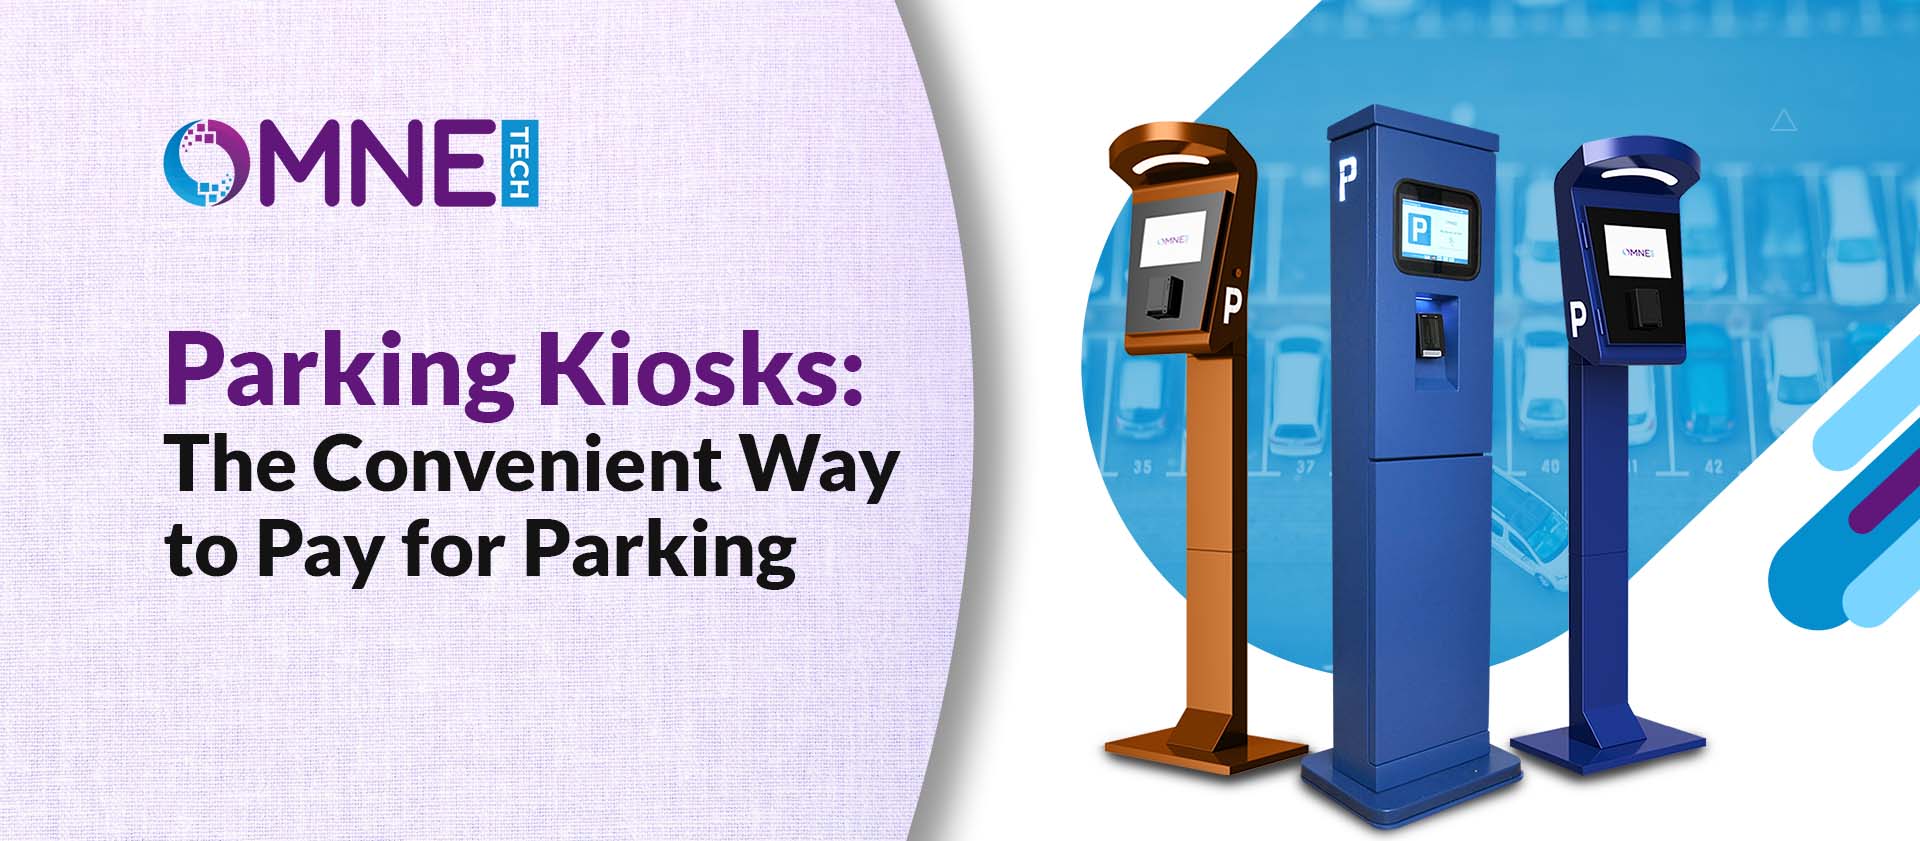 Parking Kiosks: The Convenient Way to Pay for Parking
